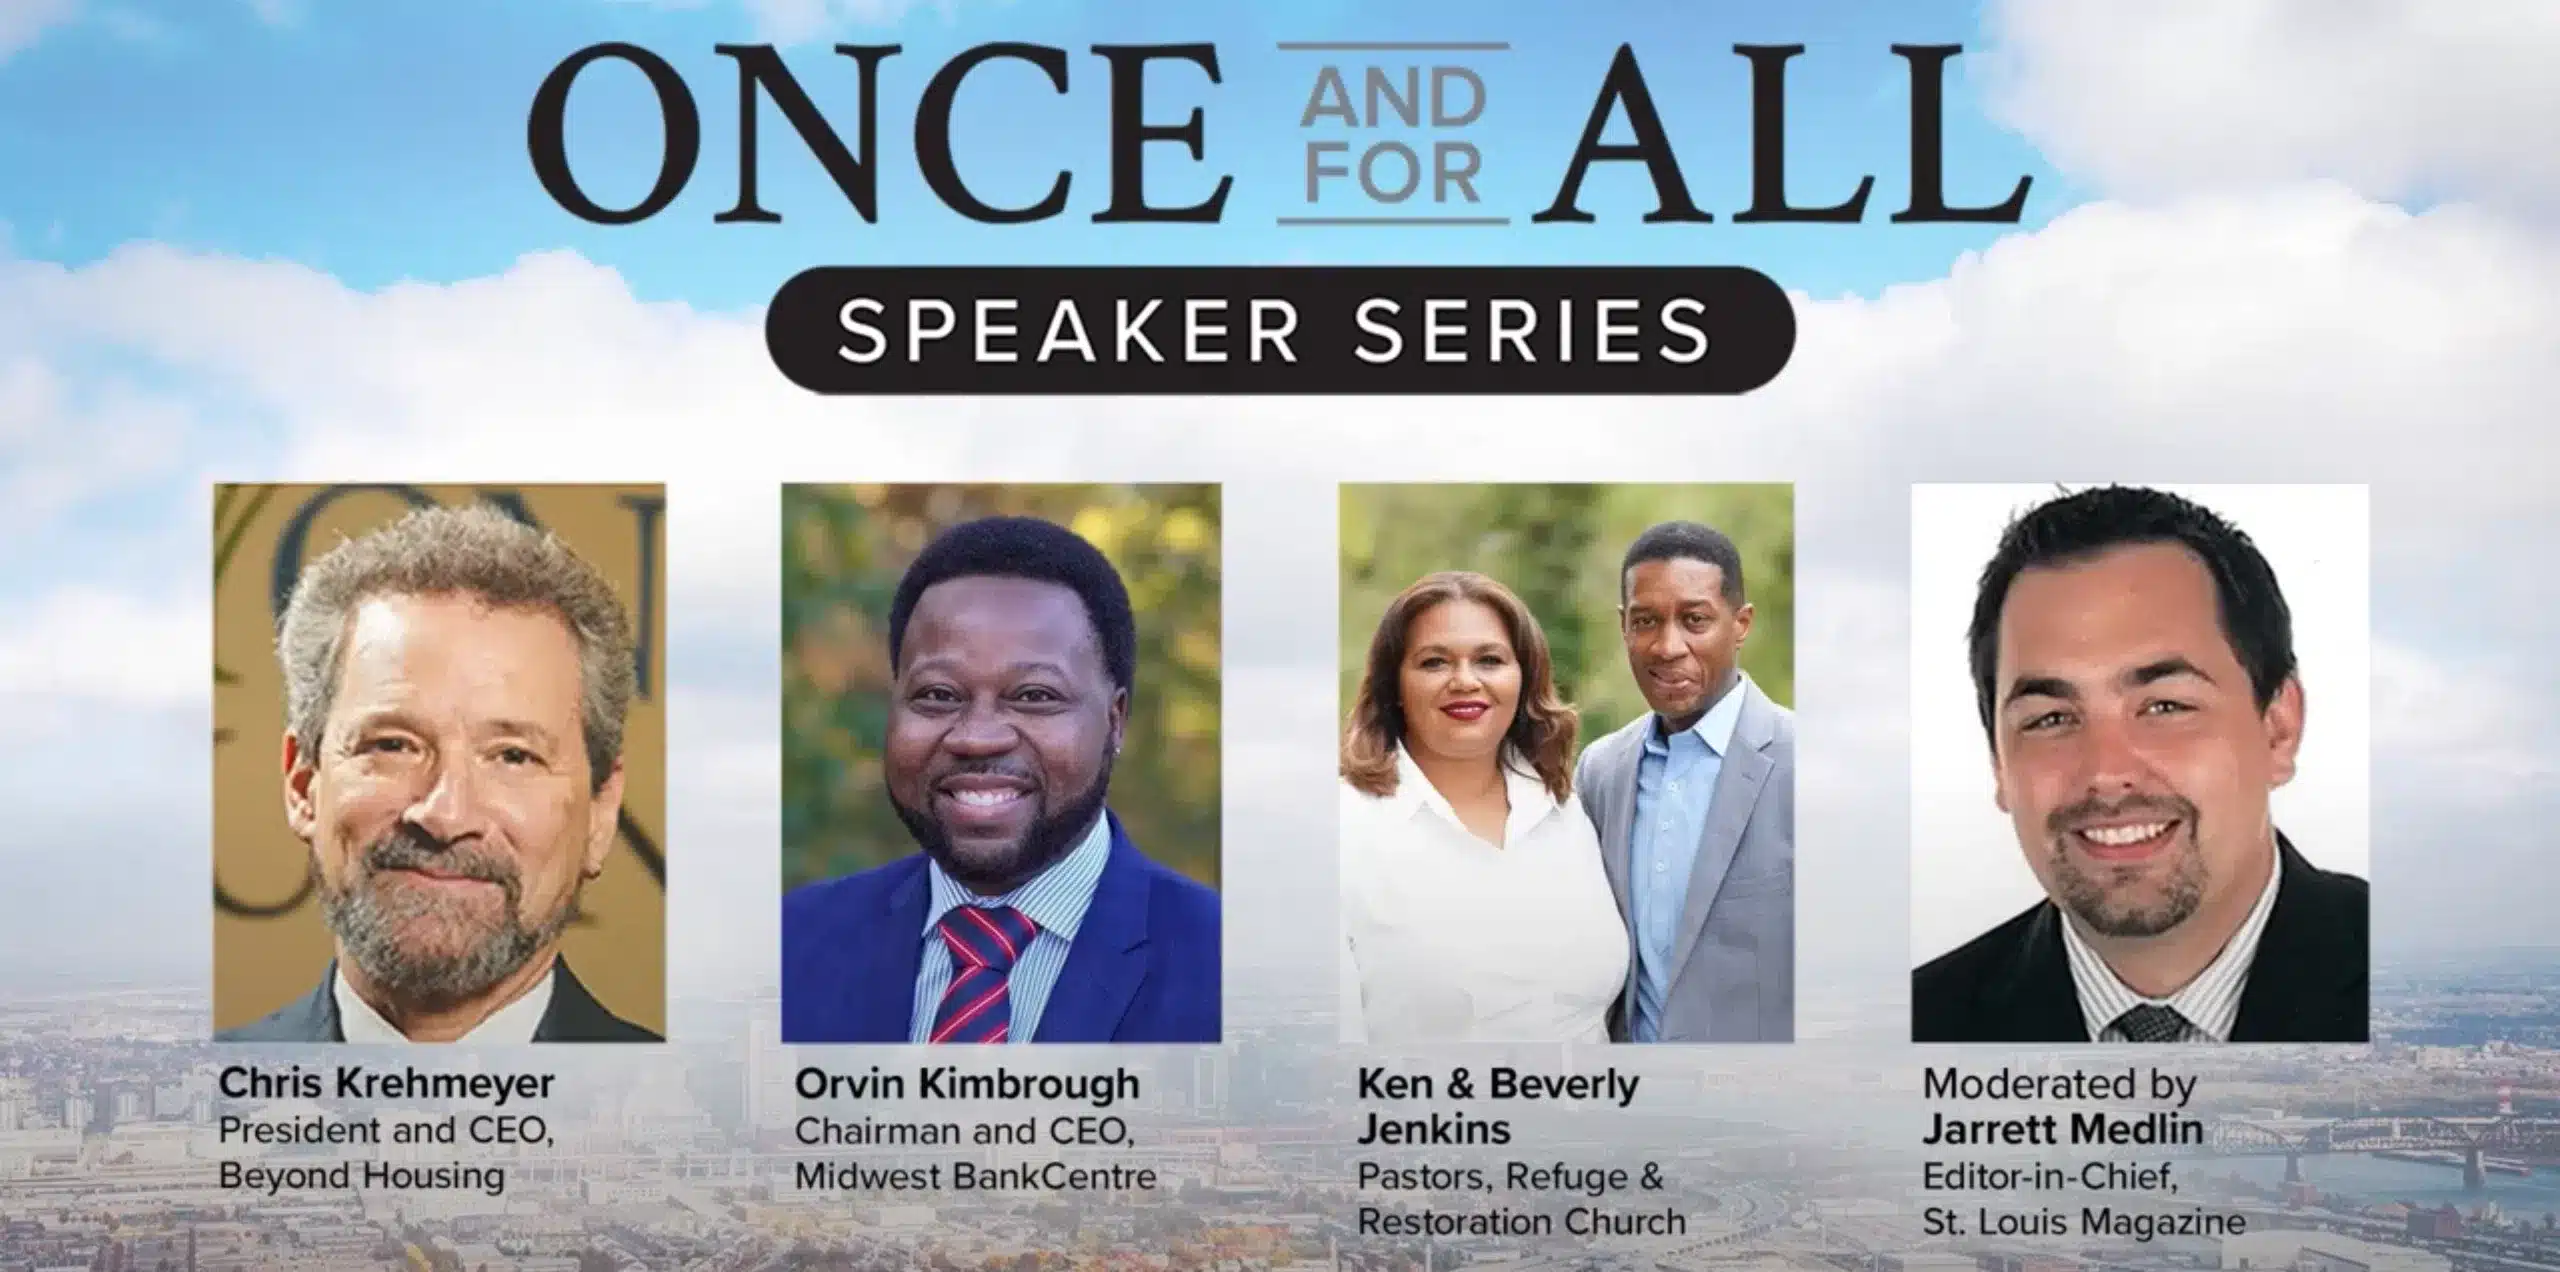 Once and for All speaker series